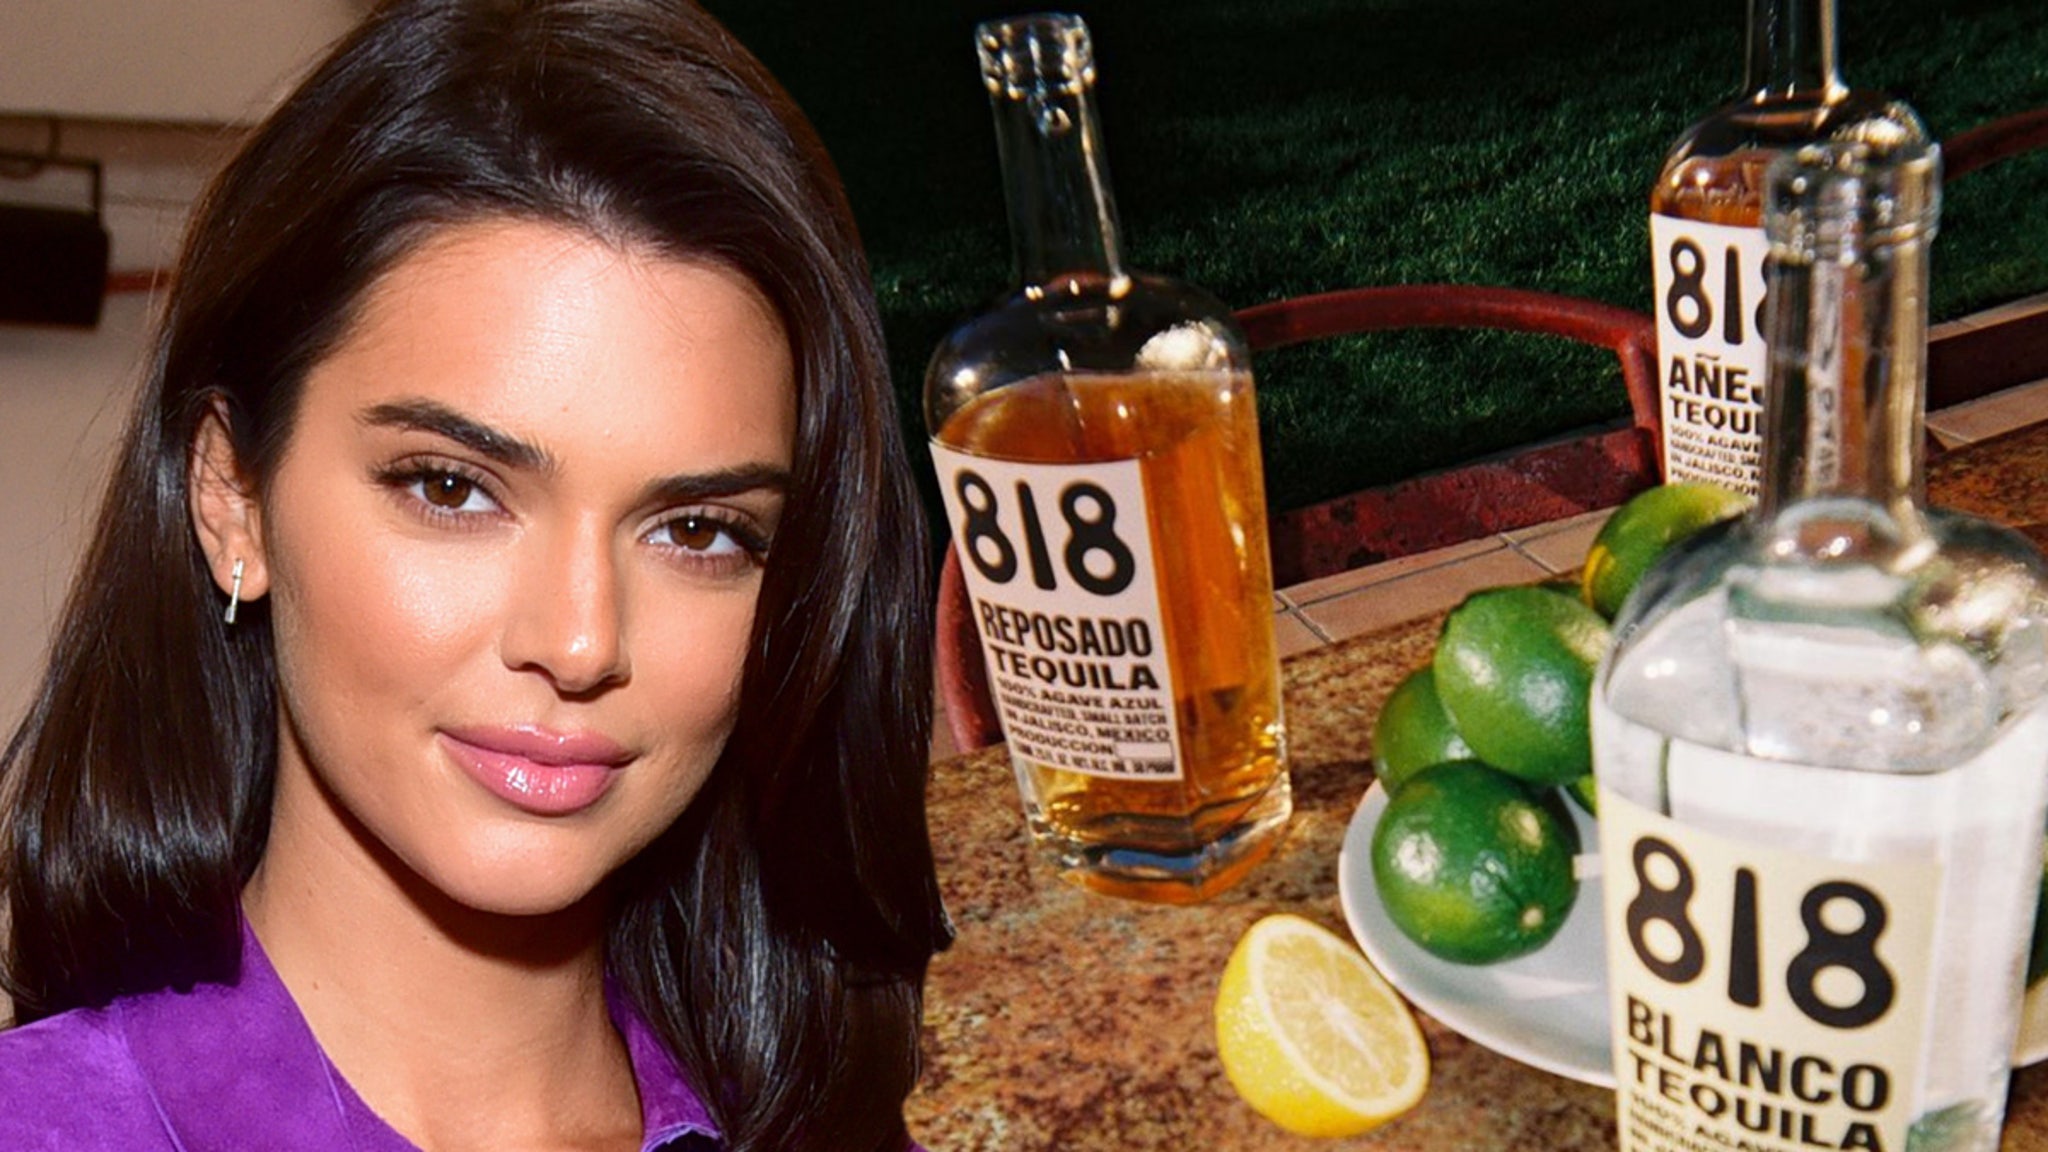 Kendall Jenner Launching New 818 Tequila Brand, Already Won Awards